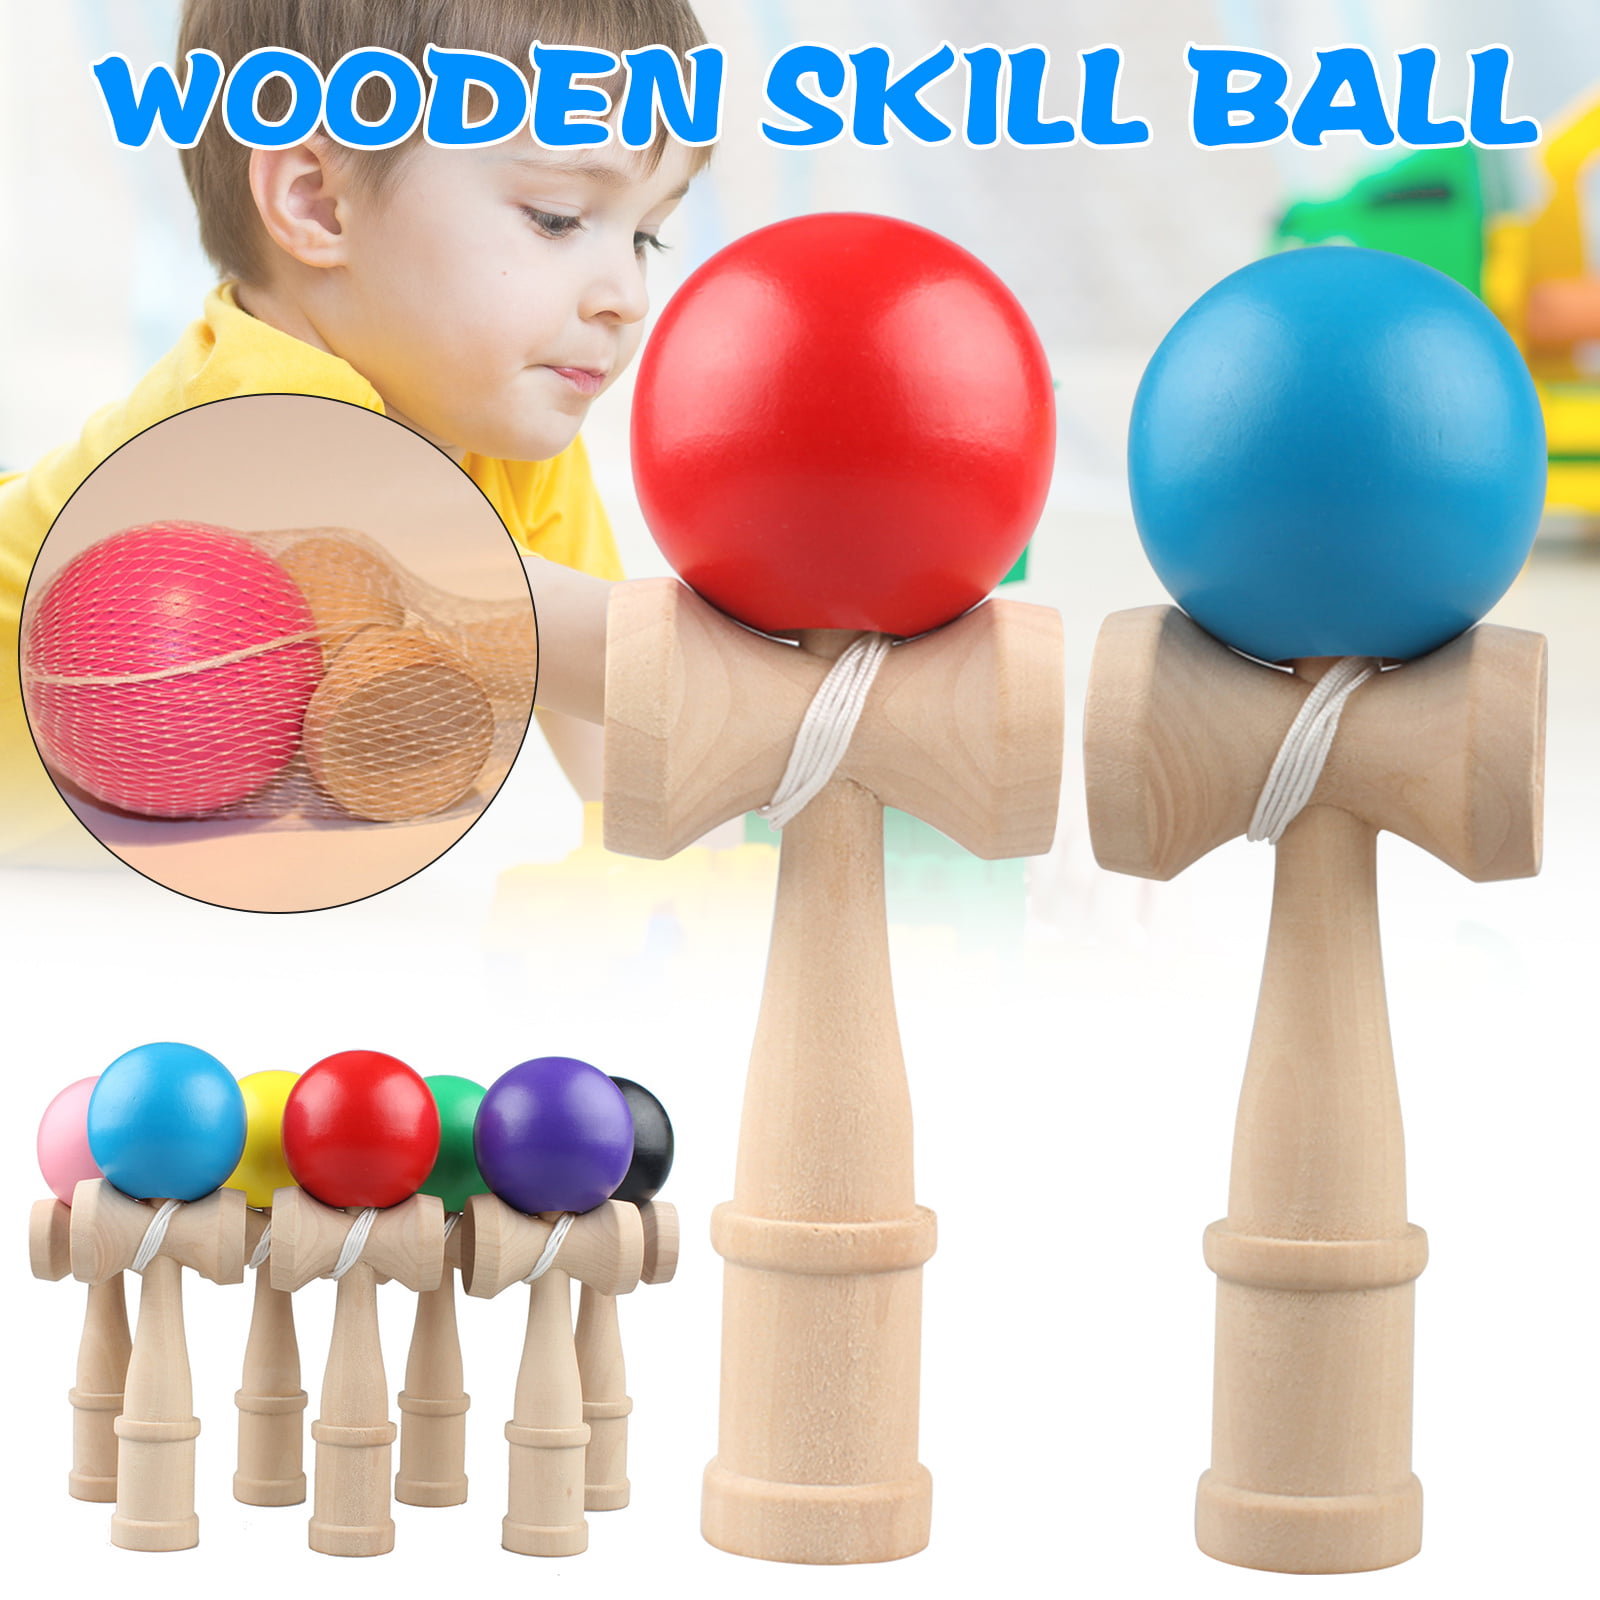 Educational Toy Wooden Ball Sword Exercise Hand Skill Toy Fun Toys for Kids SM 